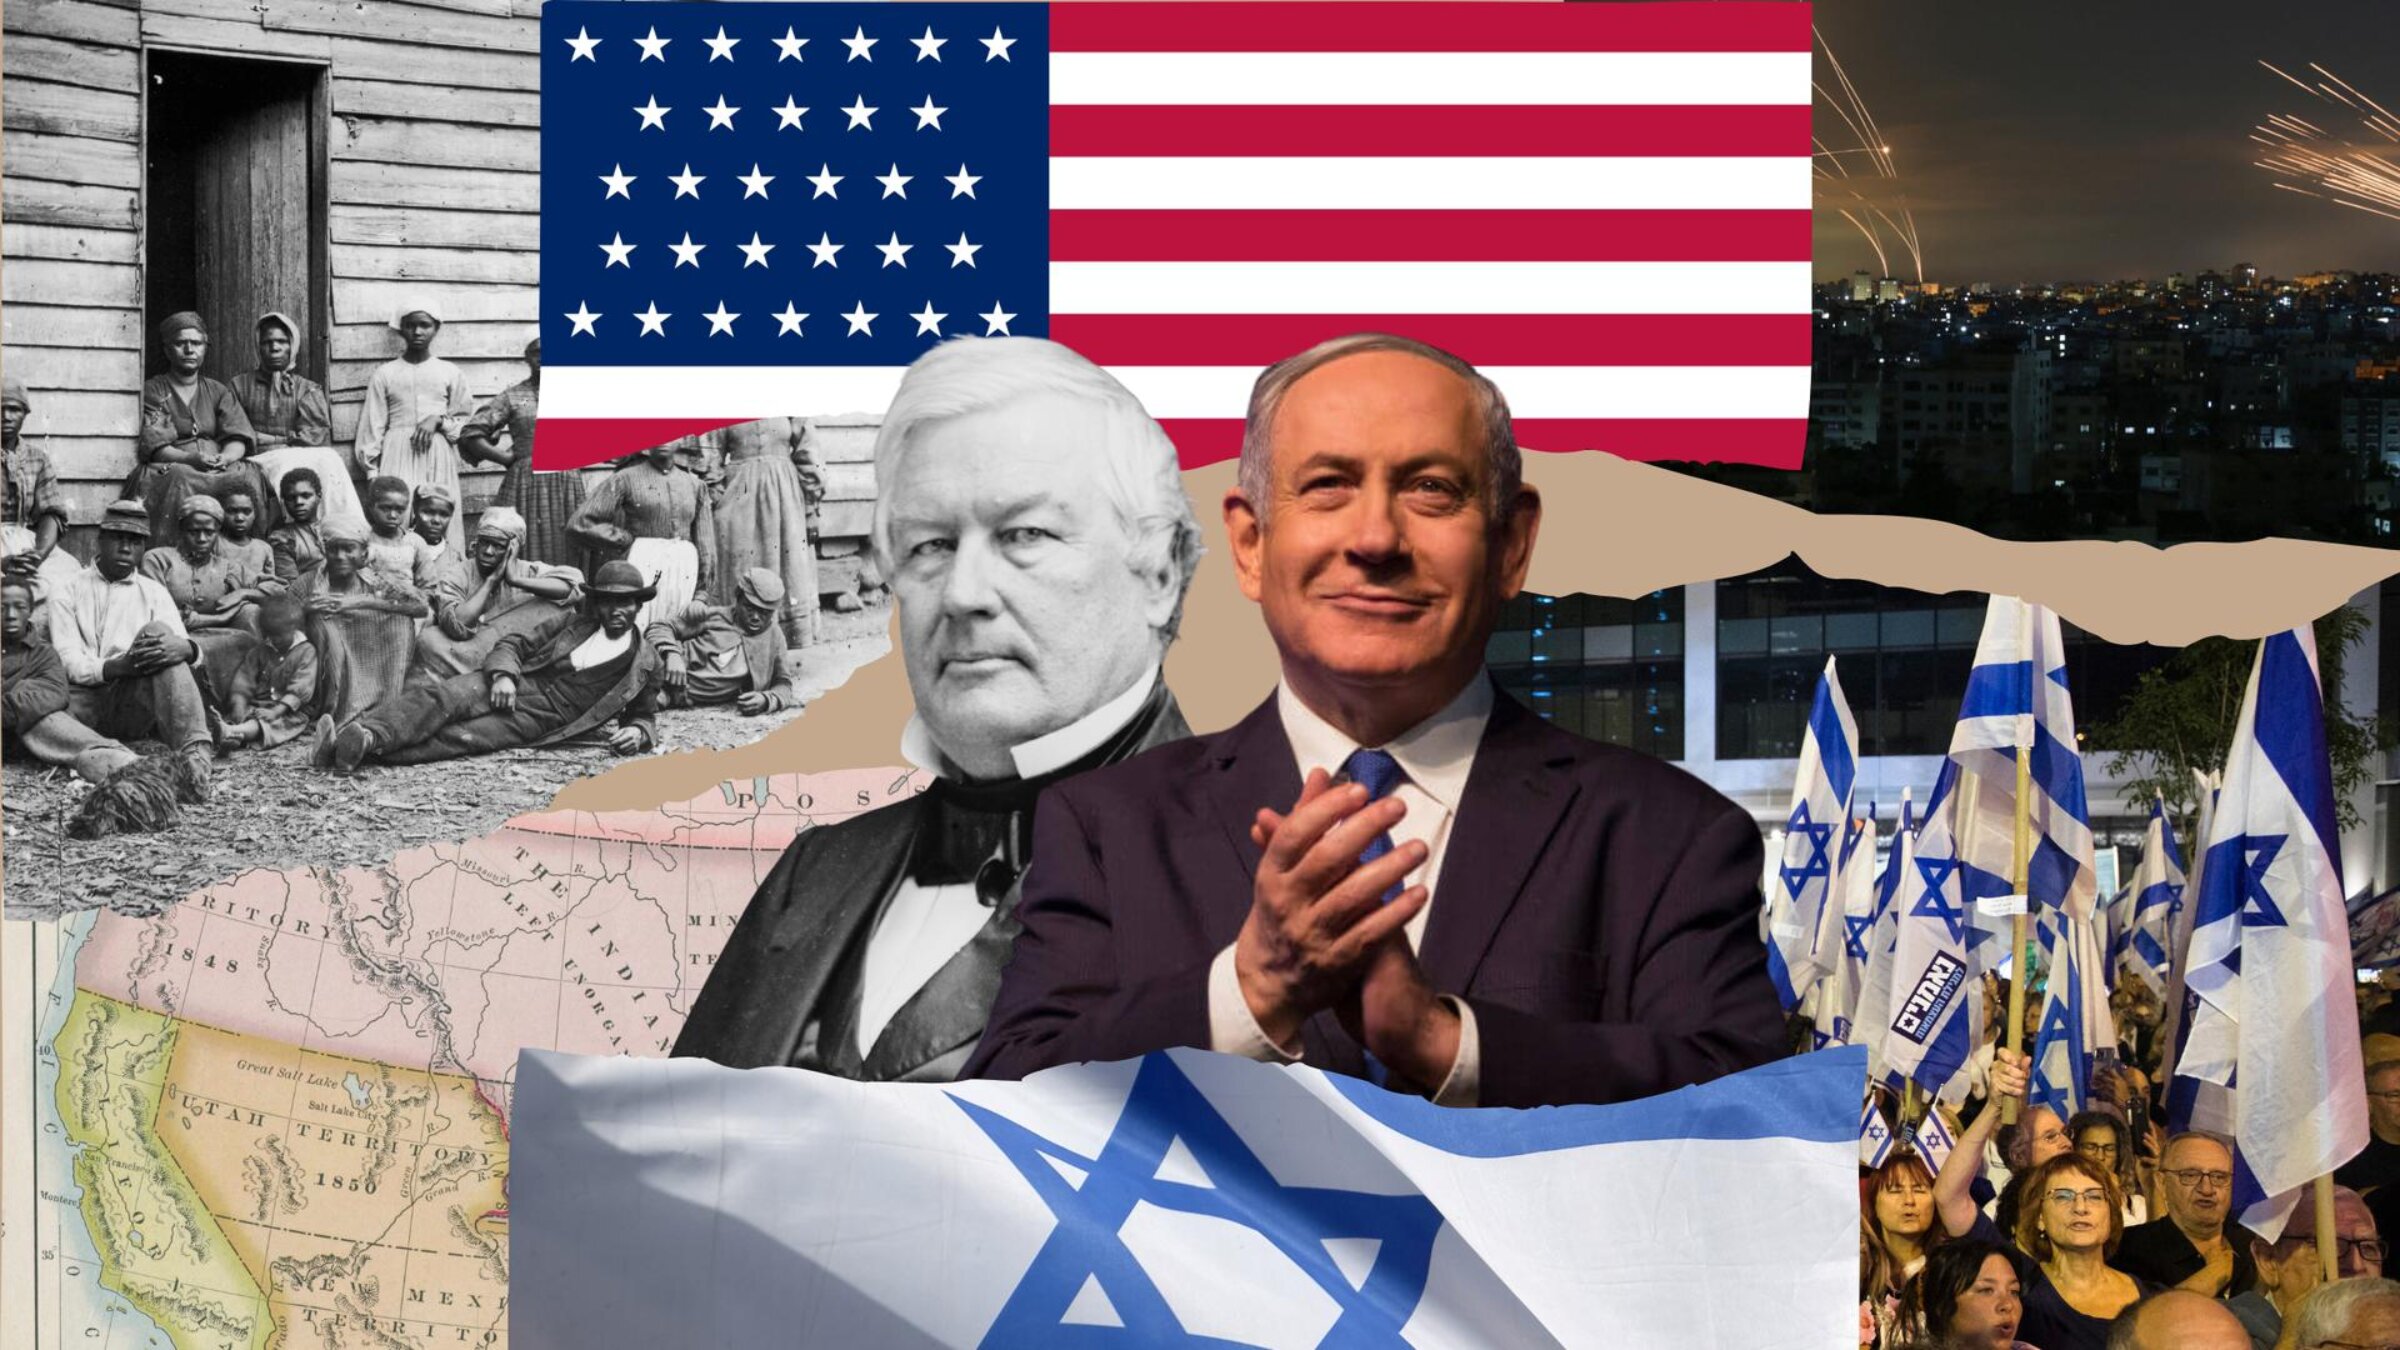 How similar, or different, are 1851 America and 2023 Israel?